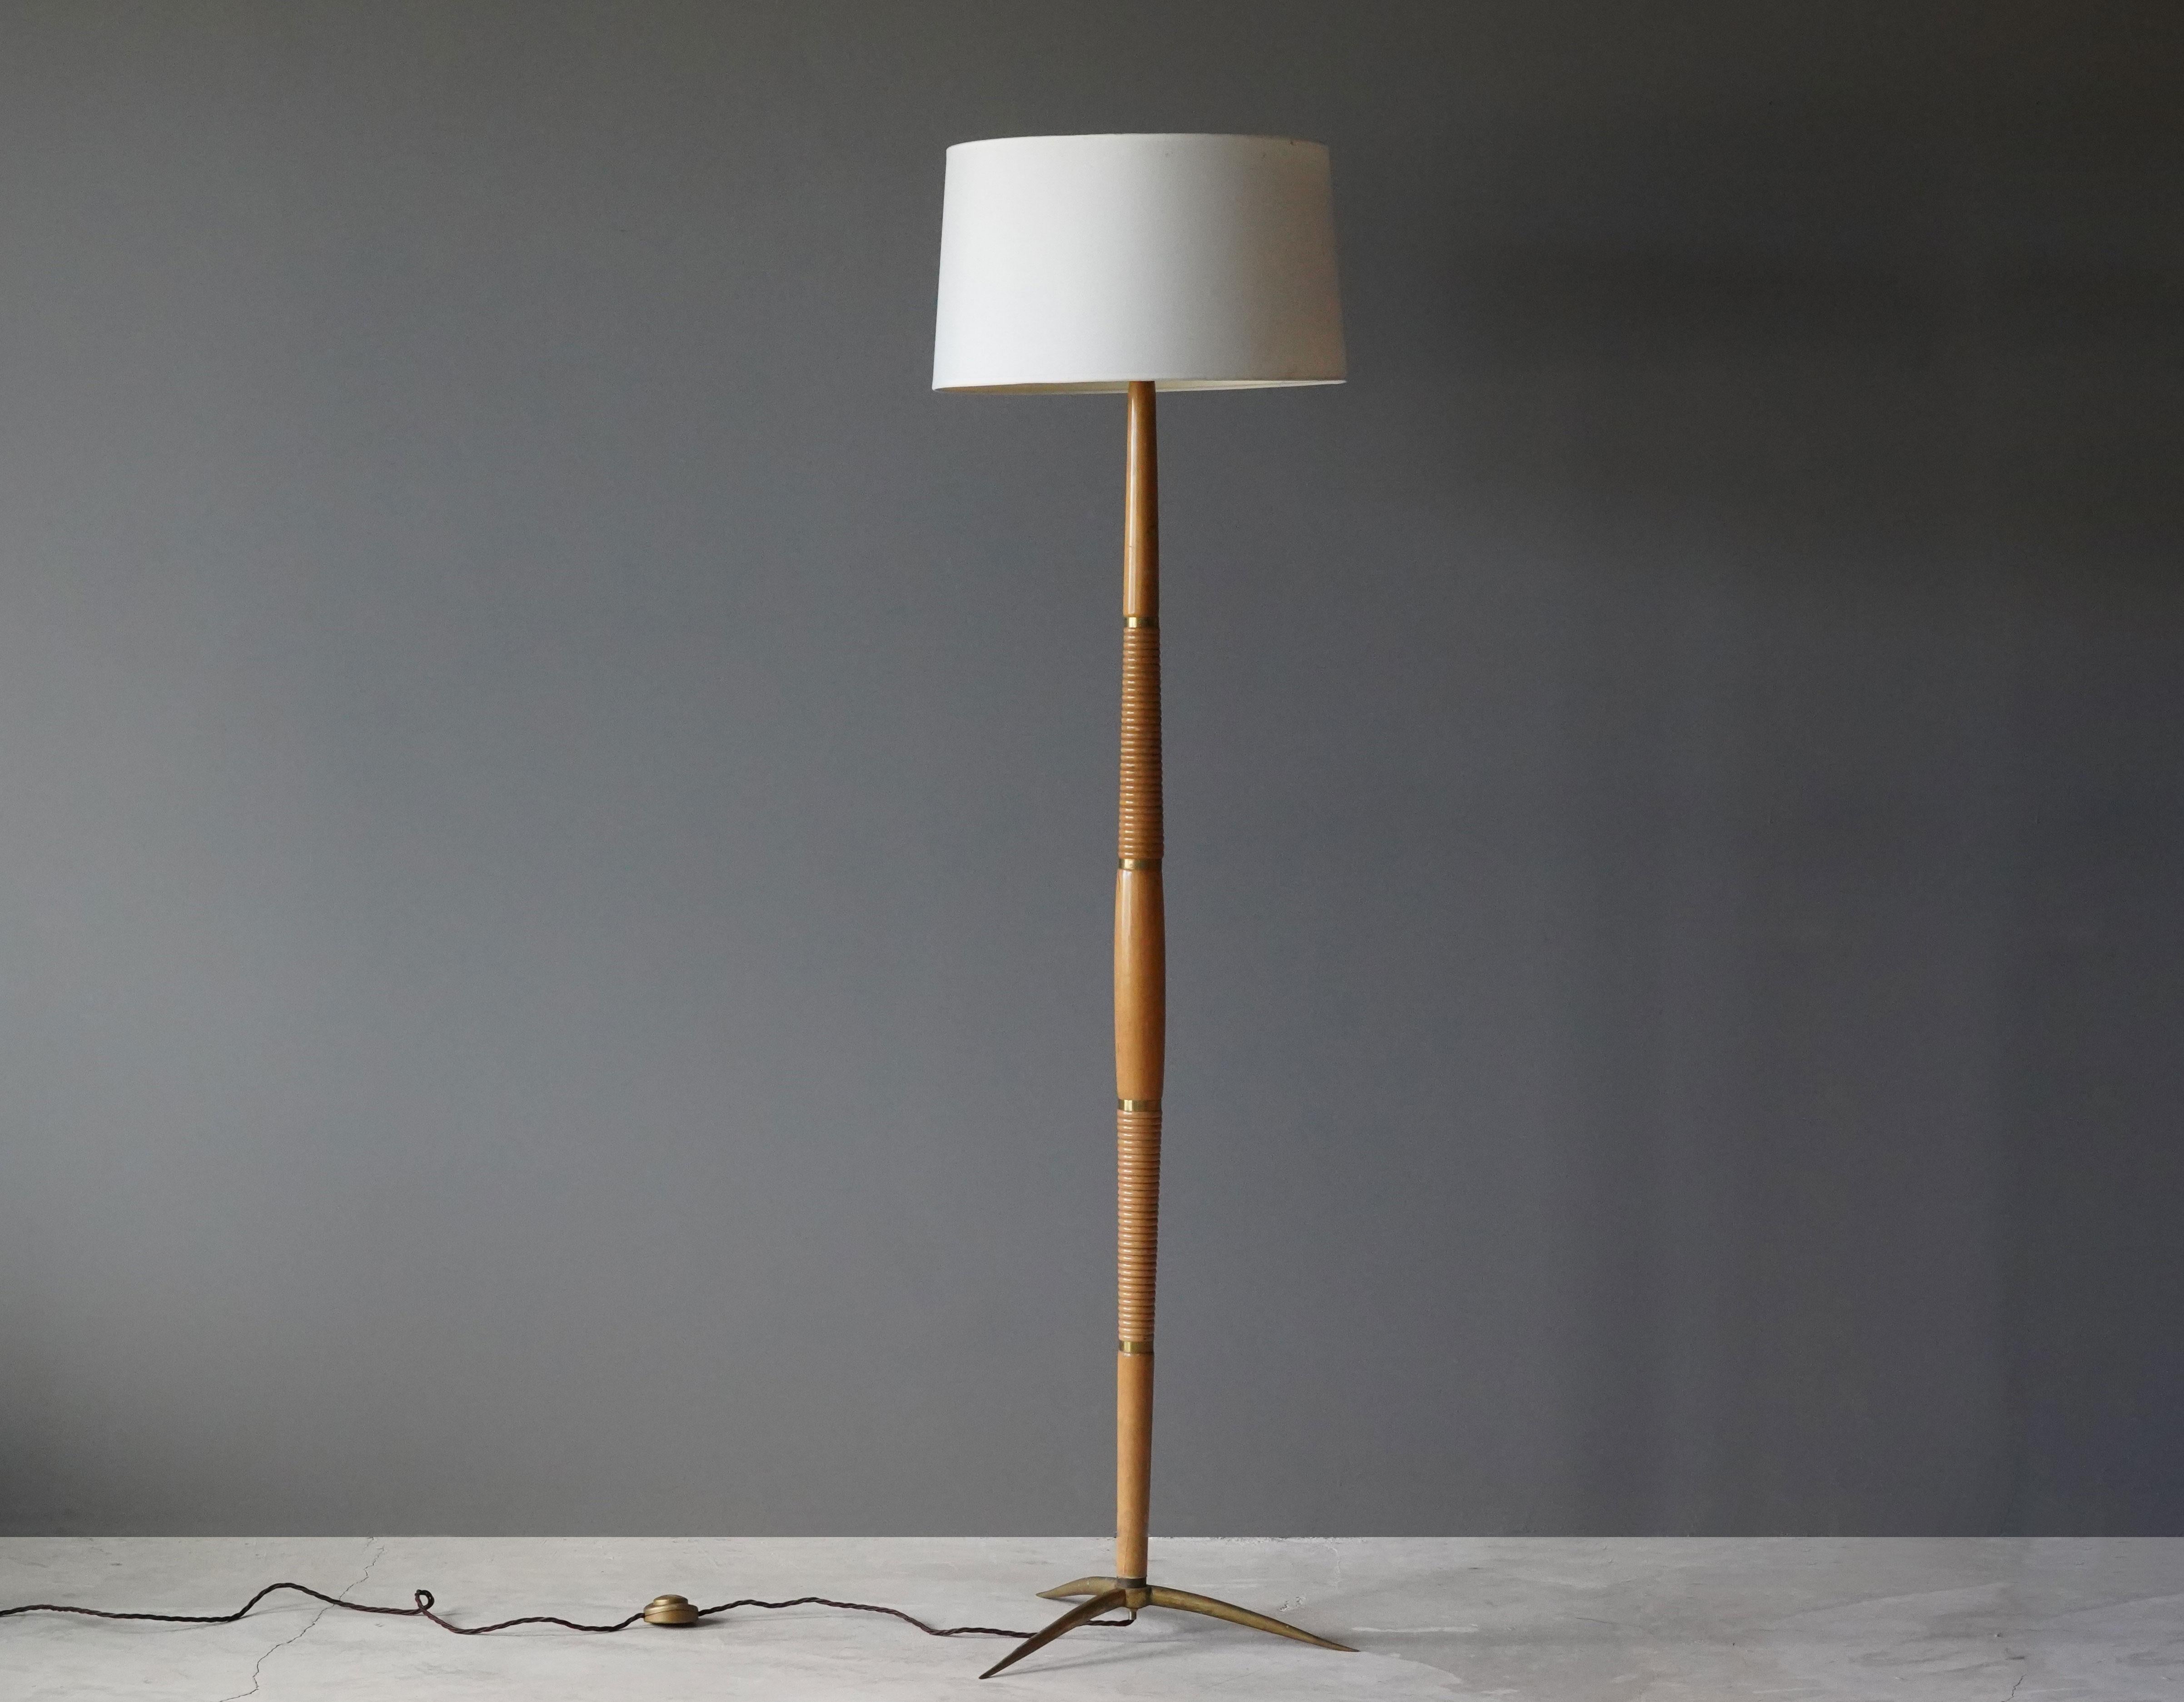 A highly modernist floor lamp. In turned wood on a brass base. Later fabric screen.

Other designers and makers of the period include Angelo Lelii, Max Ingrand, Fontana Arte, Stilnovo, and Gino Sarfatti.